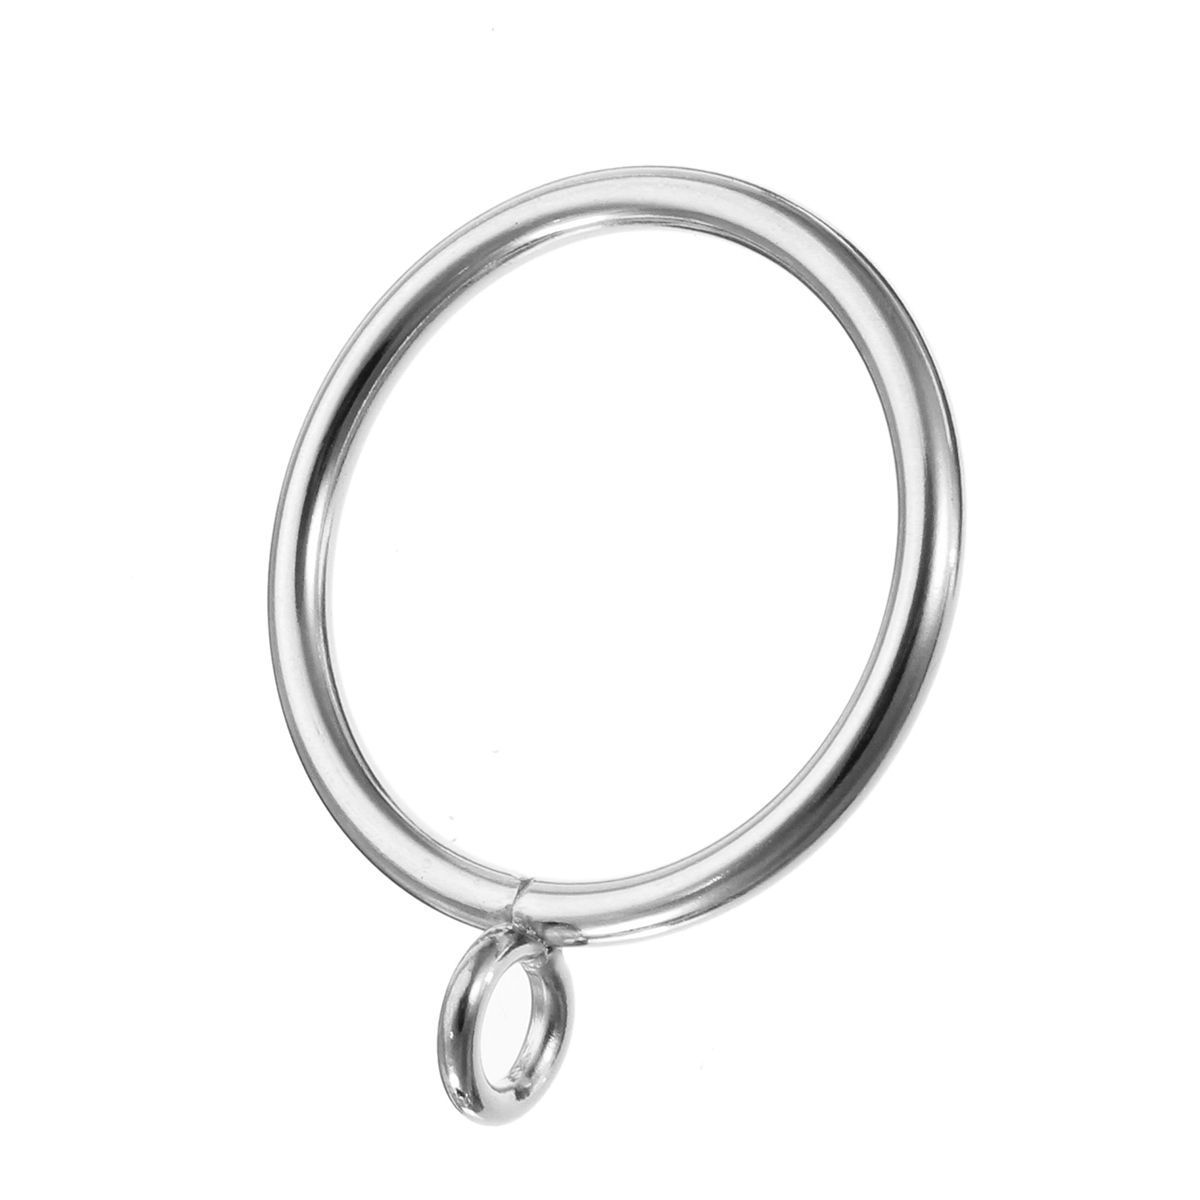 10Pcs-Metal-Curtain-Rings-Drapery-Hanging-Eyelet-Rings-3-Colors-for-38mm-Pole-Rod-1247501